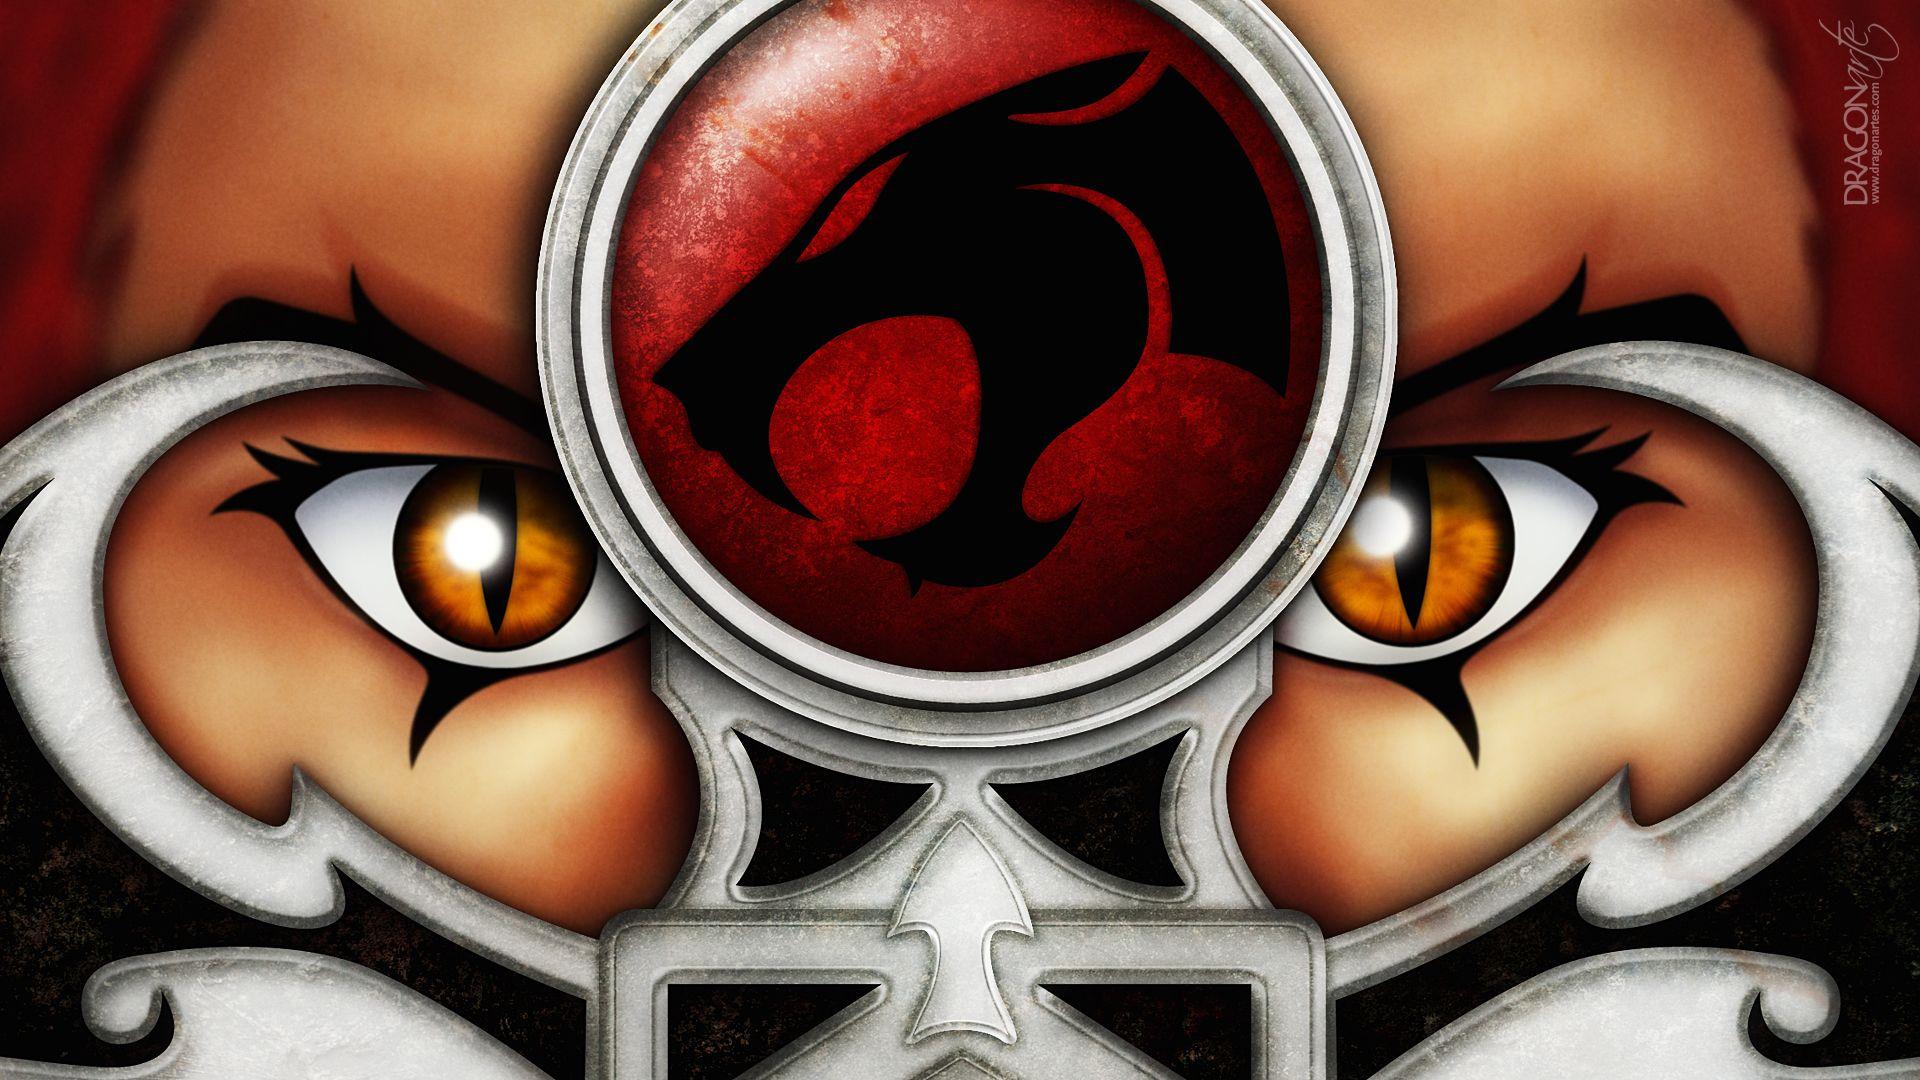 Thundercats Full HD Wallpaper and Background Imagex1080